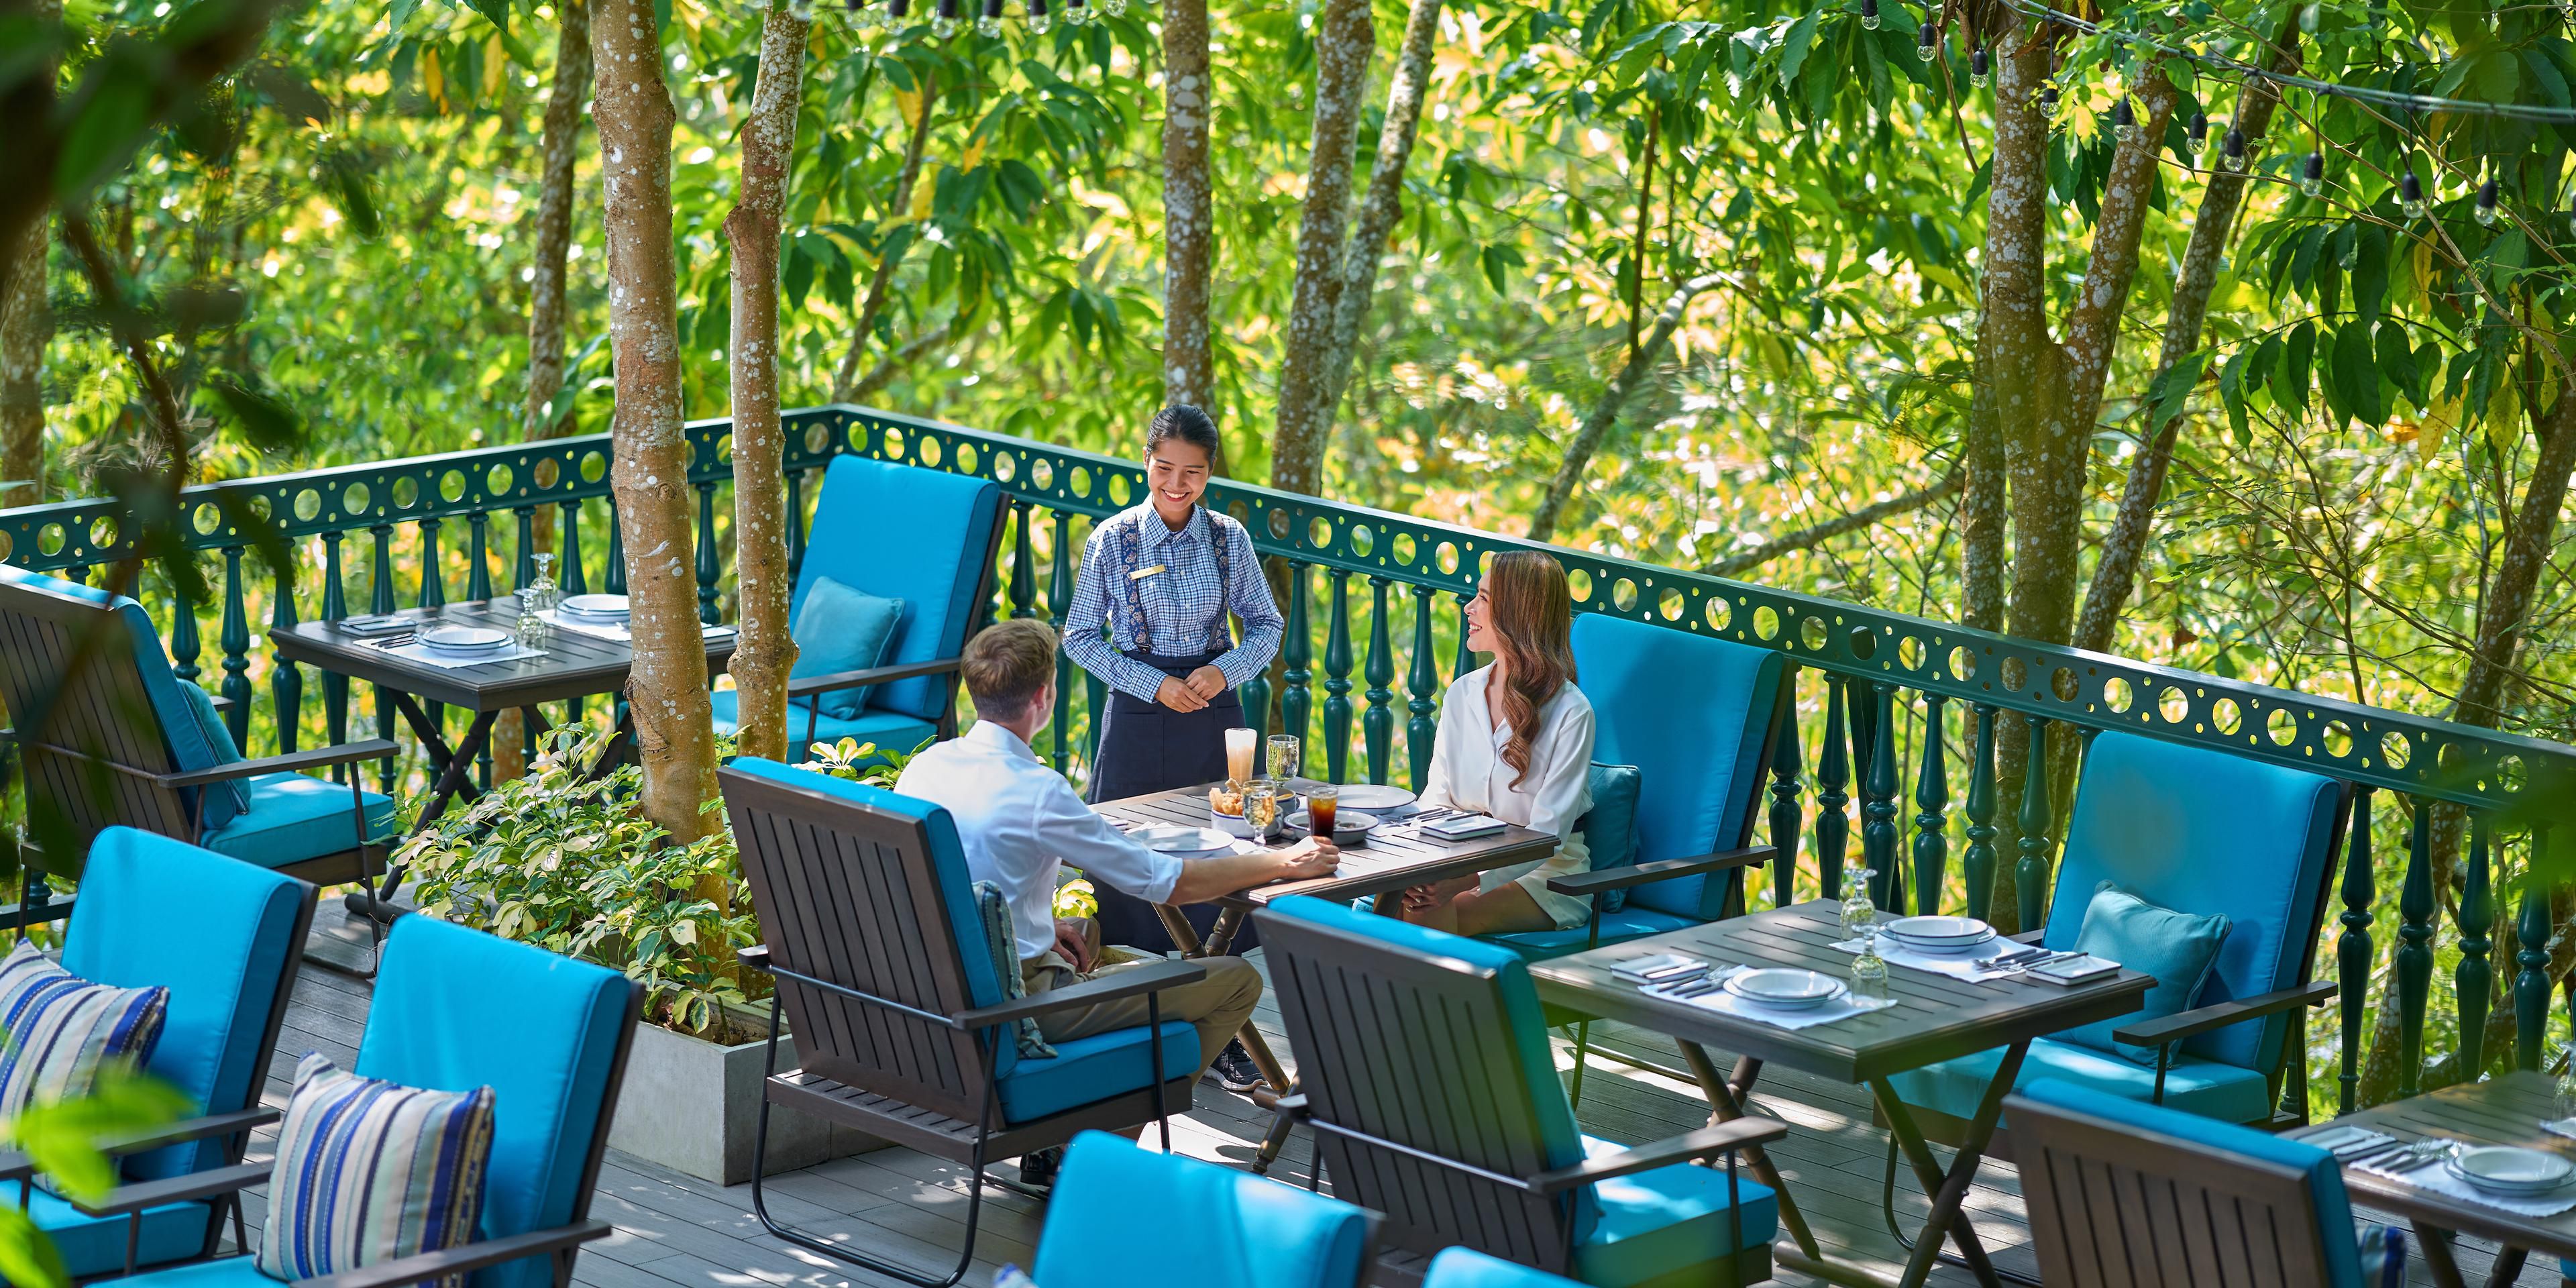 Unlock the Ultimate Freedom! Our fully flexible rate now includes a sumptuous breakfast and a delectable three-course dinner, either from a curated set menu or an indulgent buffet, all at the luxurious InterContinental Khao Yai Resort. Perfect for one or two resident adults sharing a room, this offer guarantees a dining experience like no other.